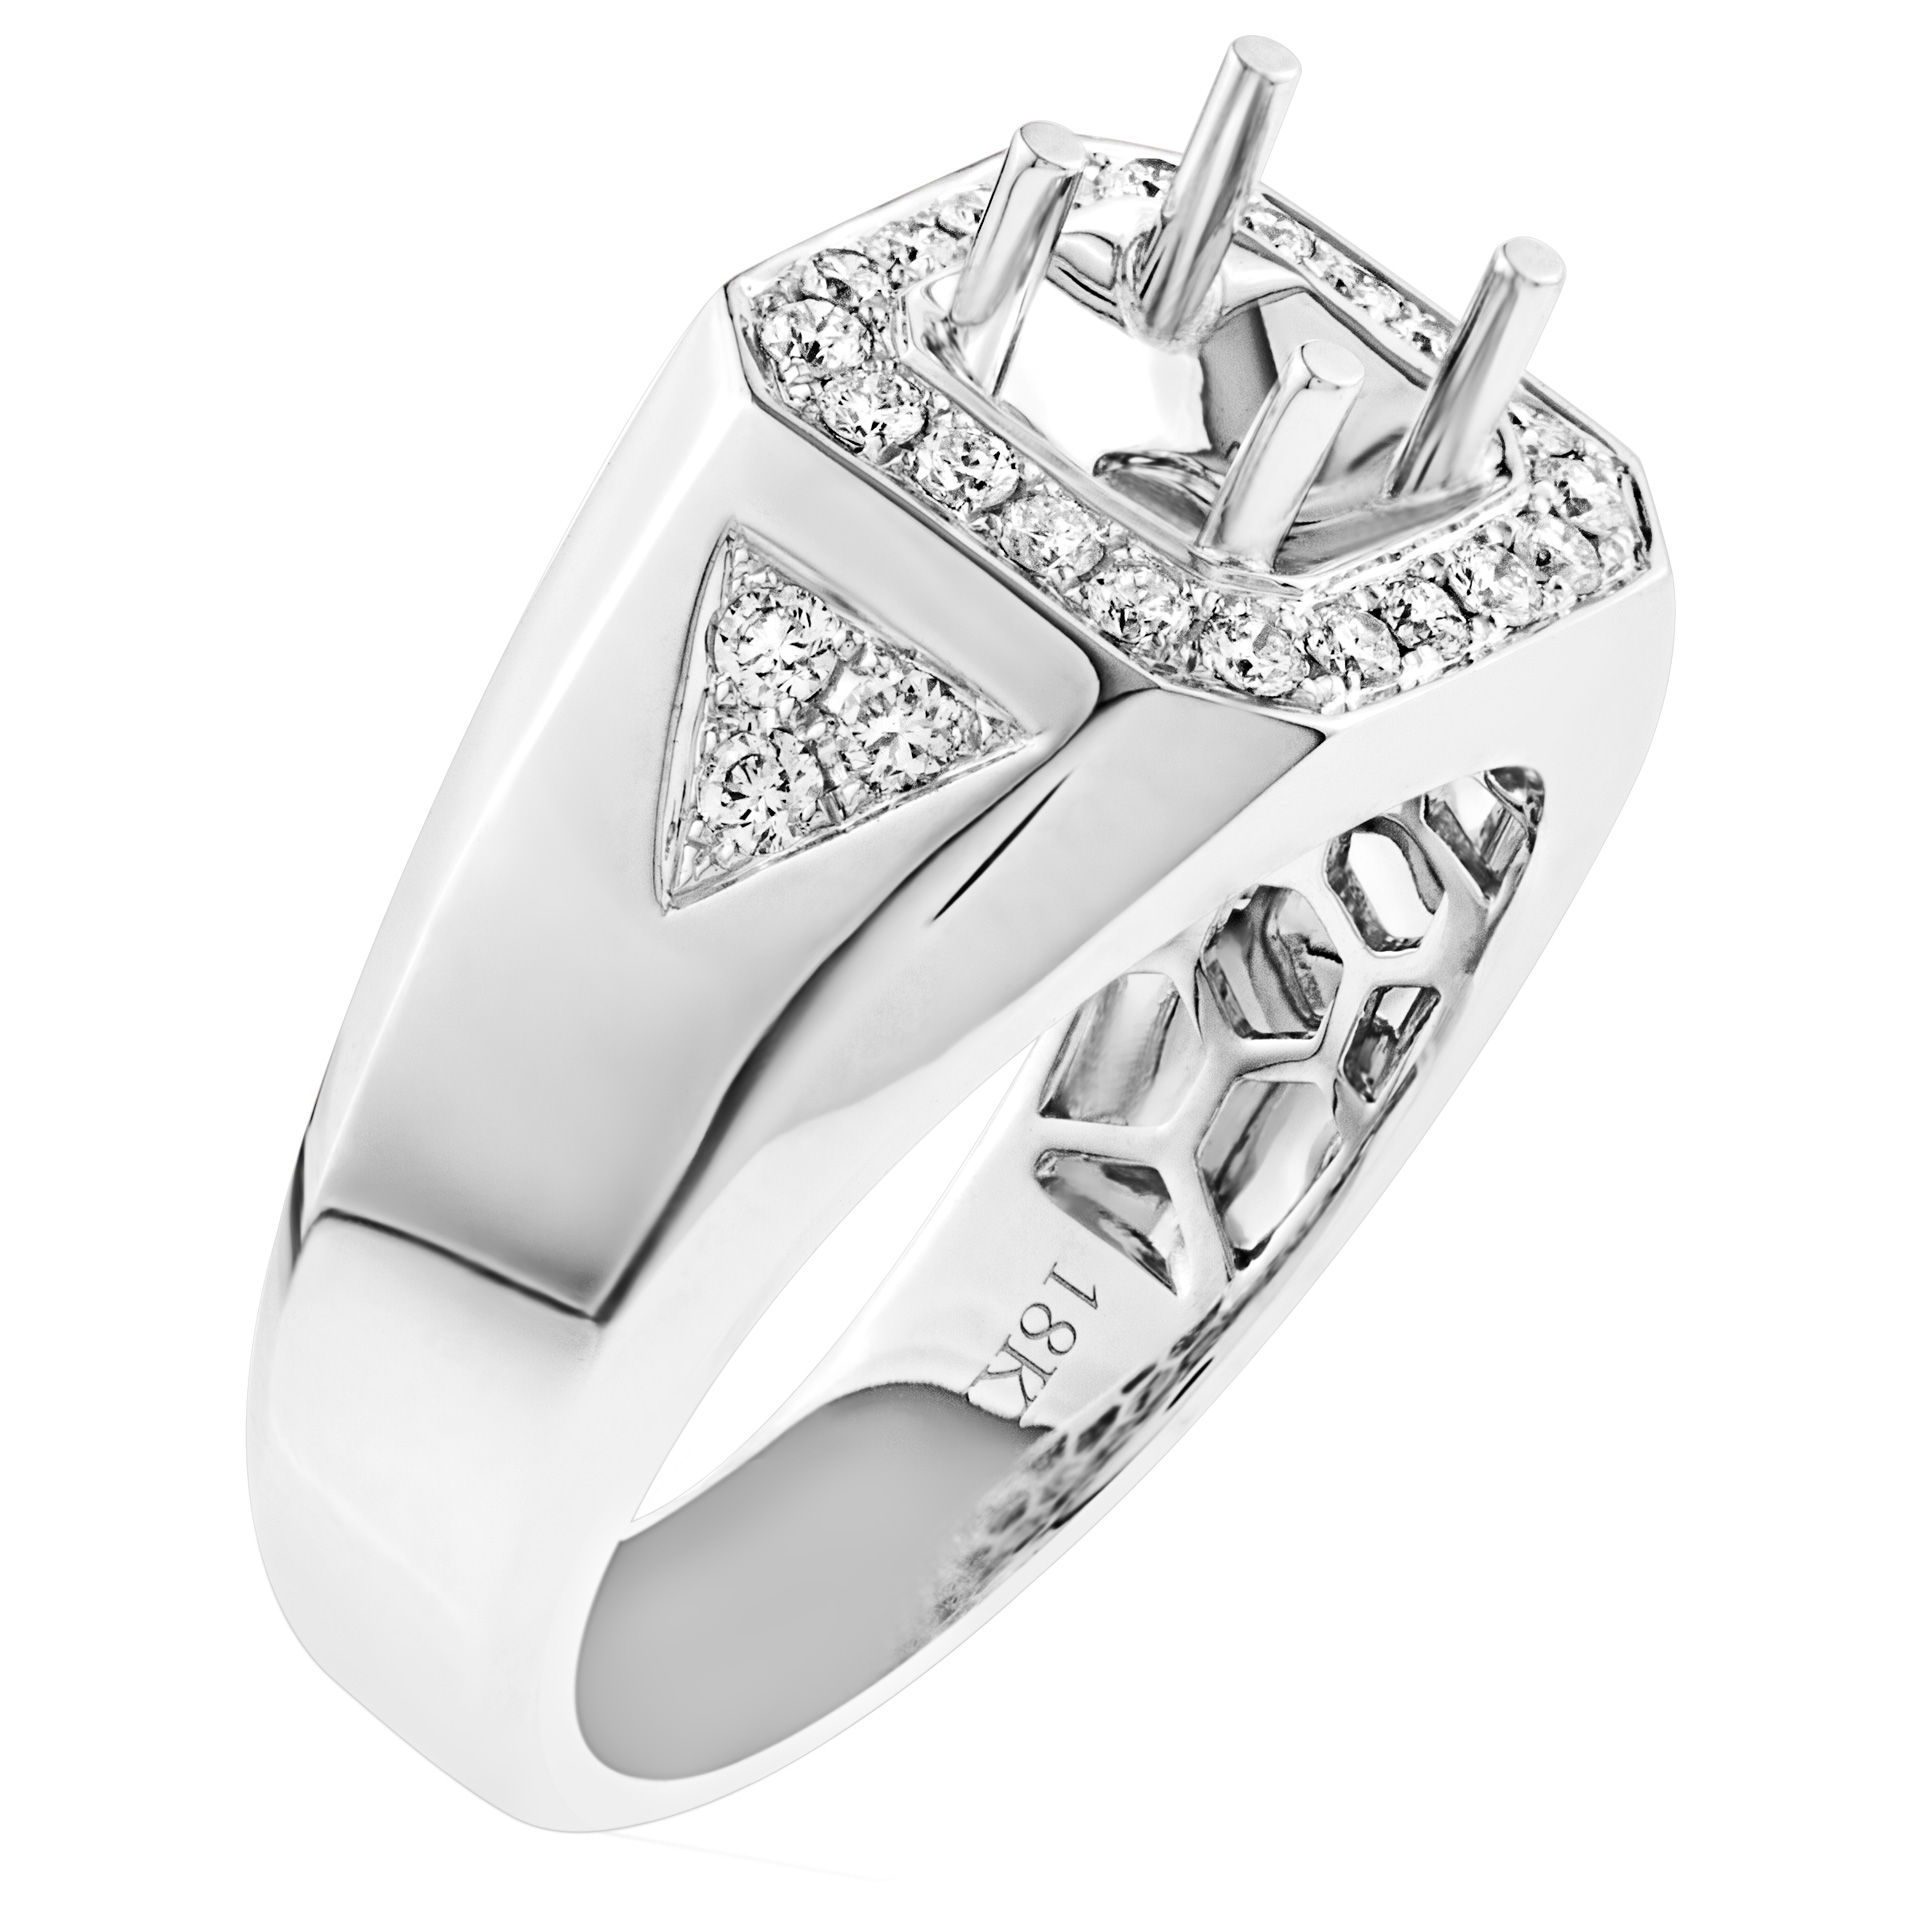 Diamond ring set in 18k white gold. 0.57 carats in round clean white diamonds image 3